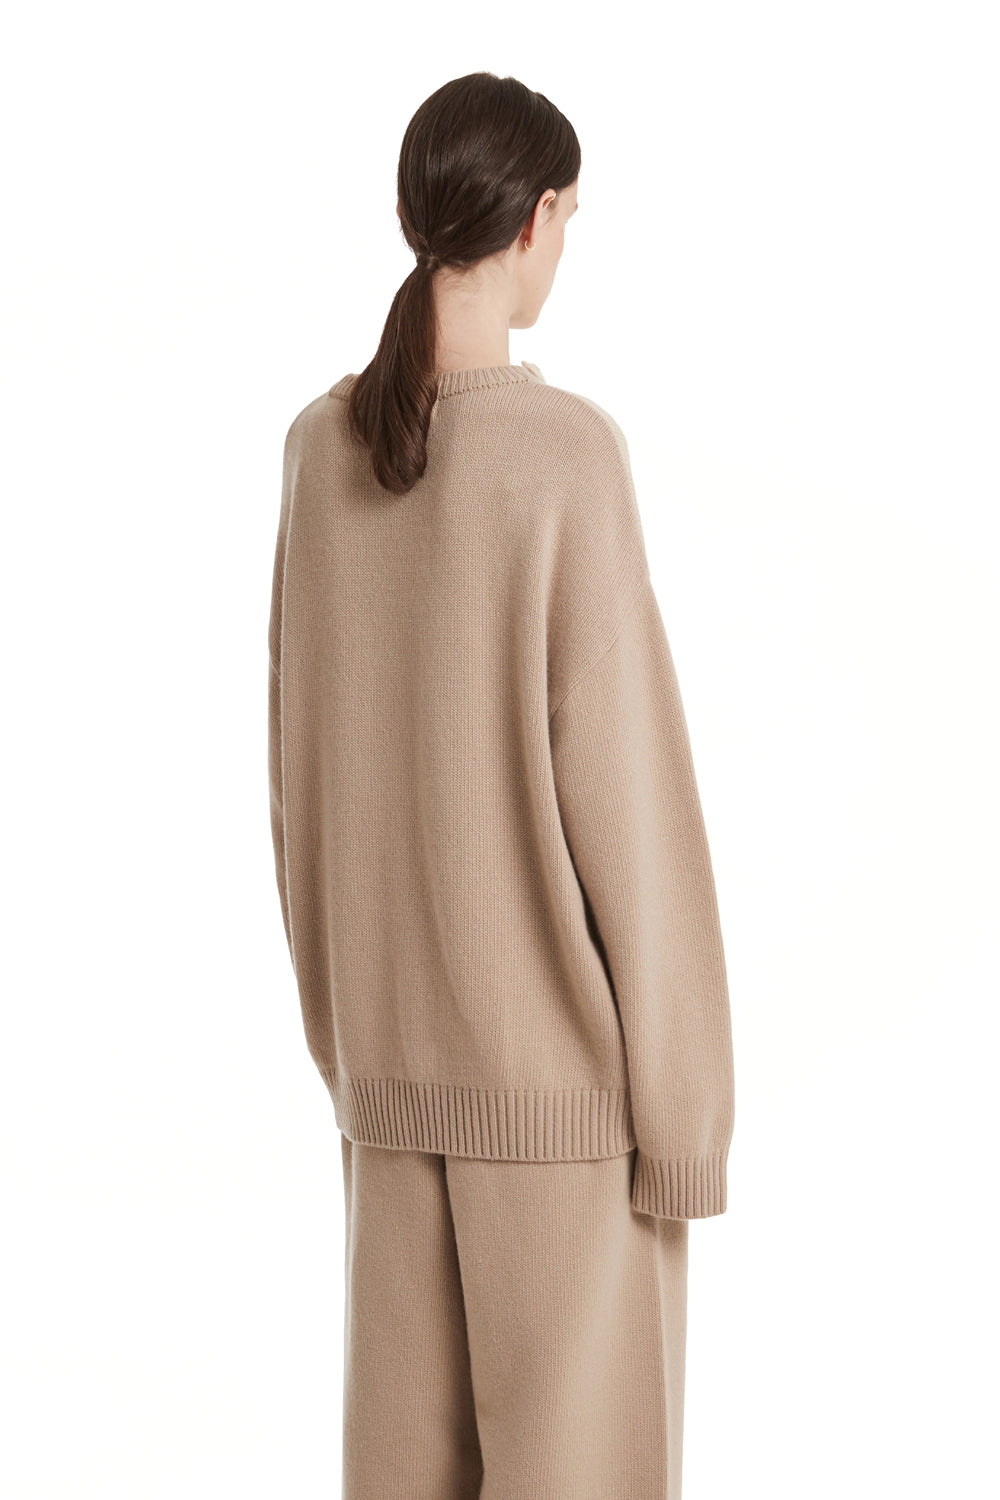 TRUNK PROJECT Ivory Ruffled Neck Knit Sweater